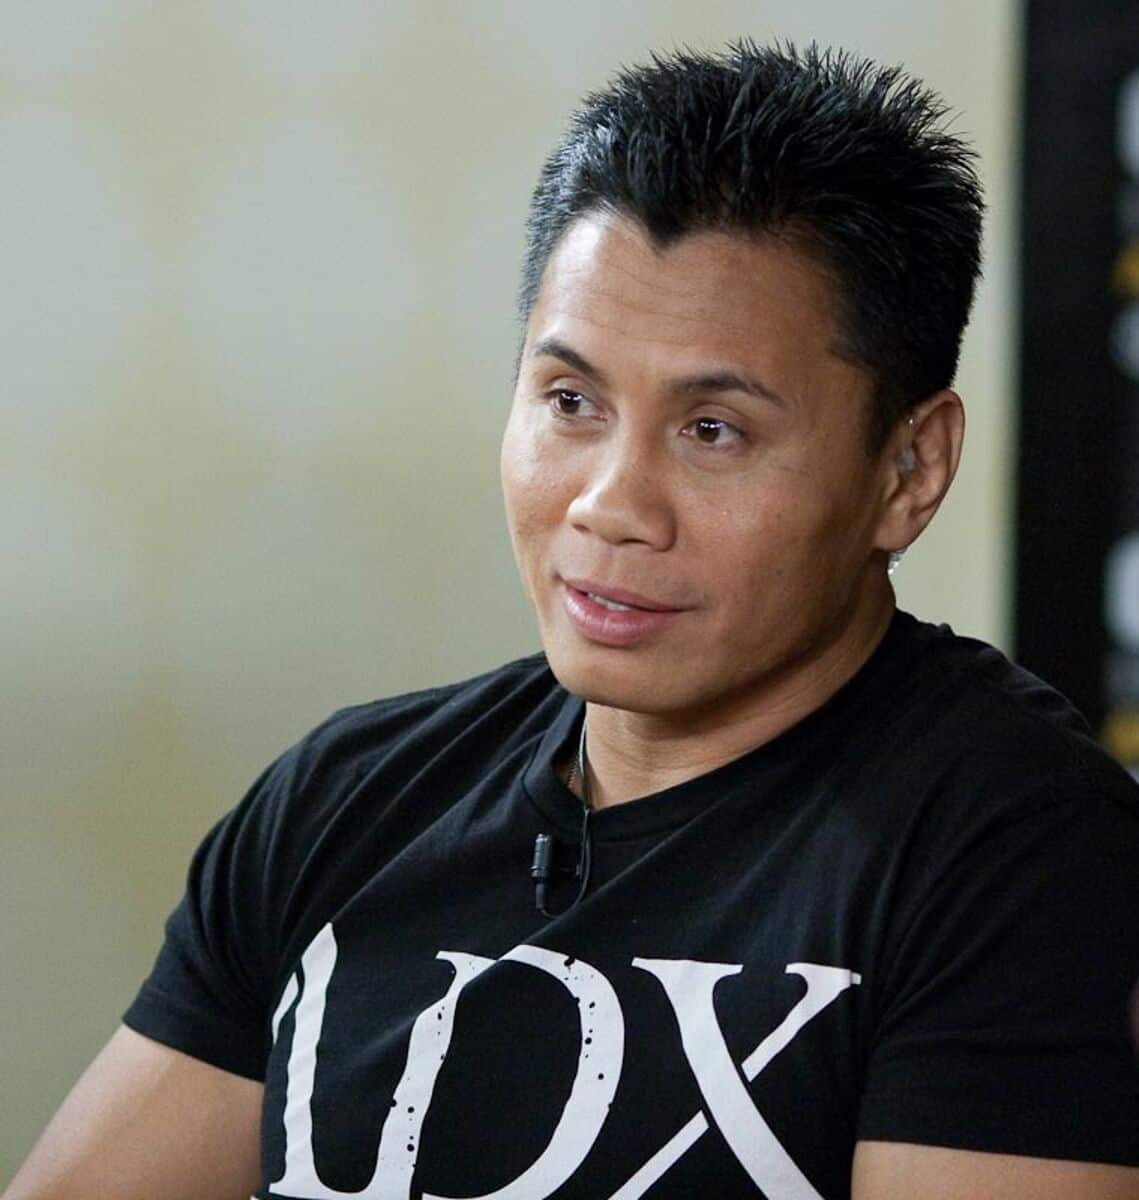 Cung Le Net Worth Details, Personal Info